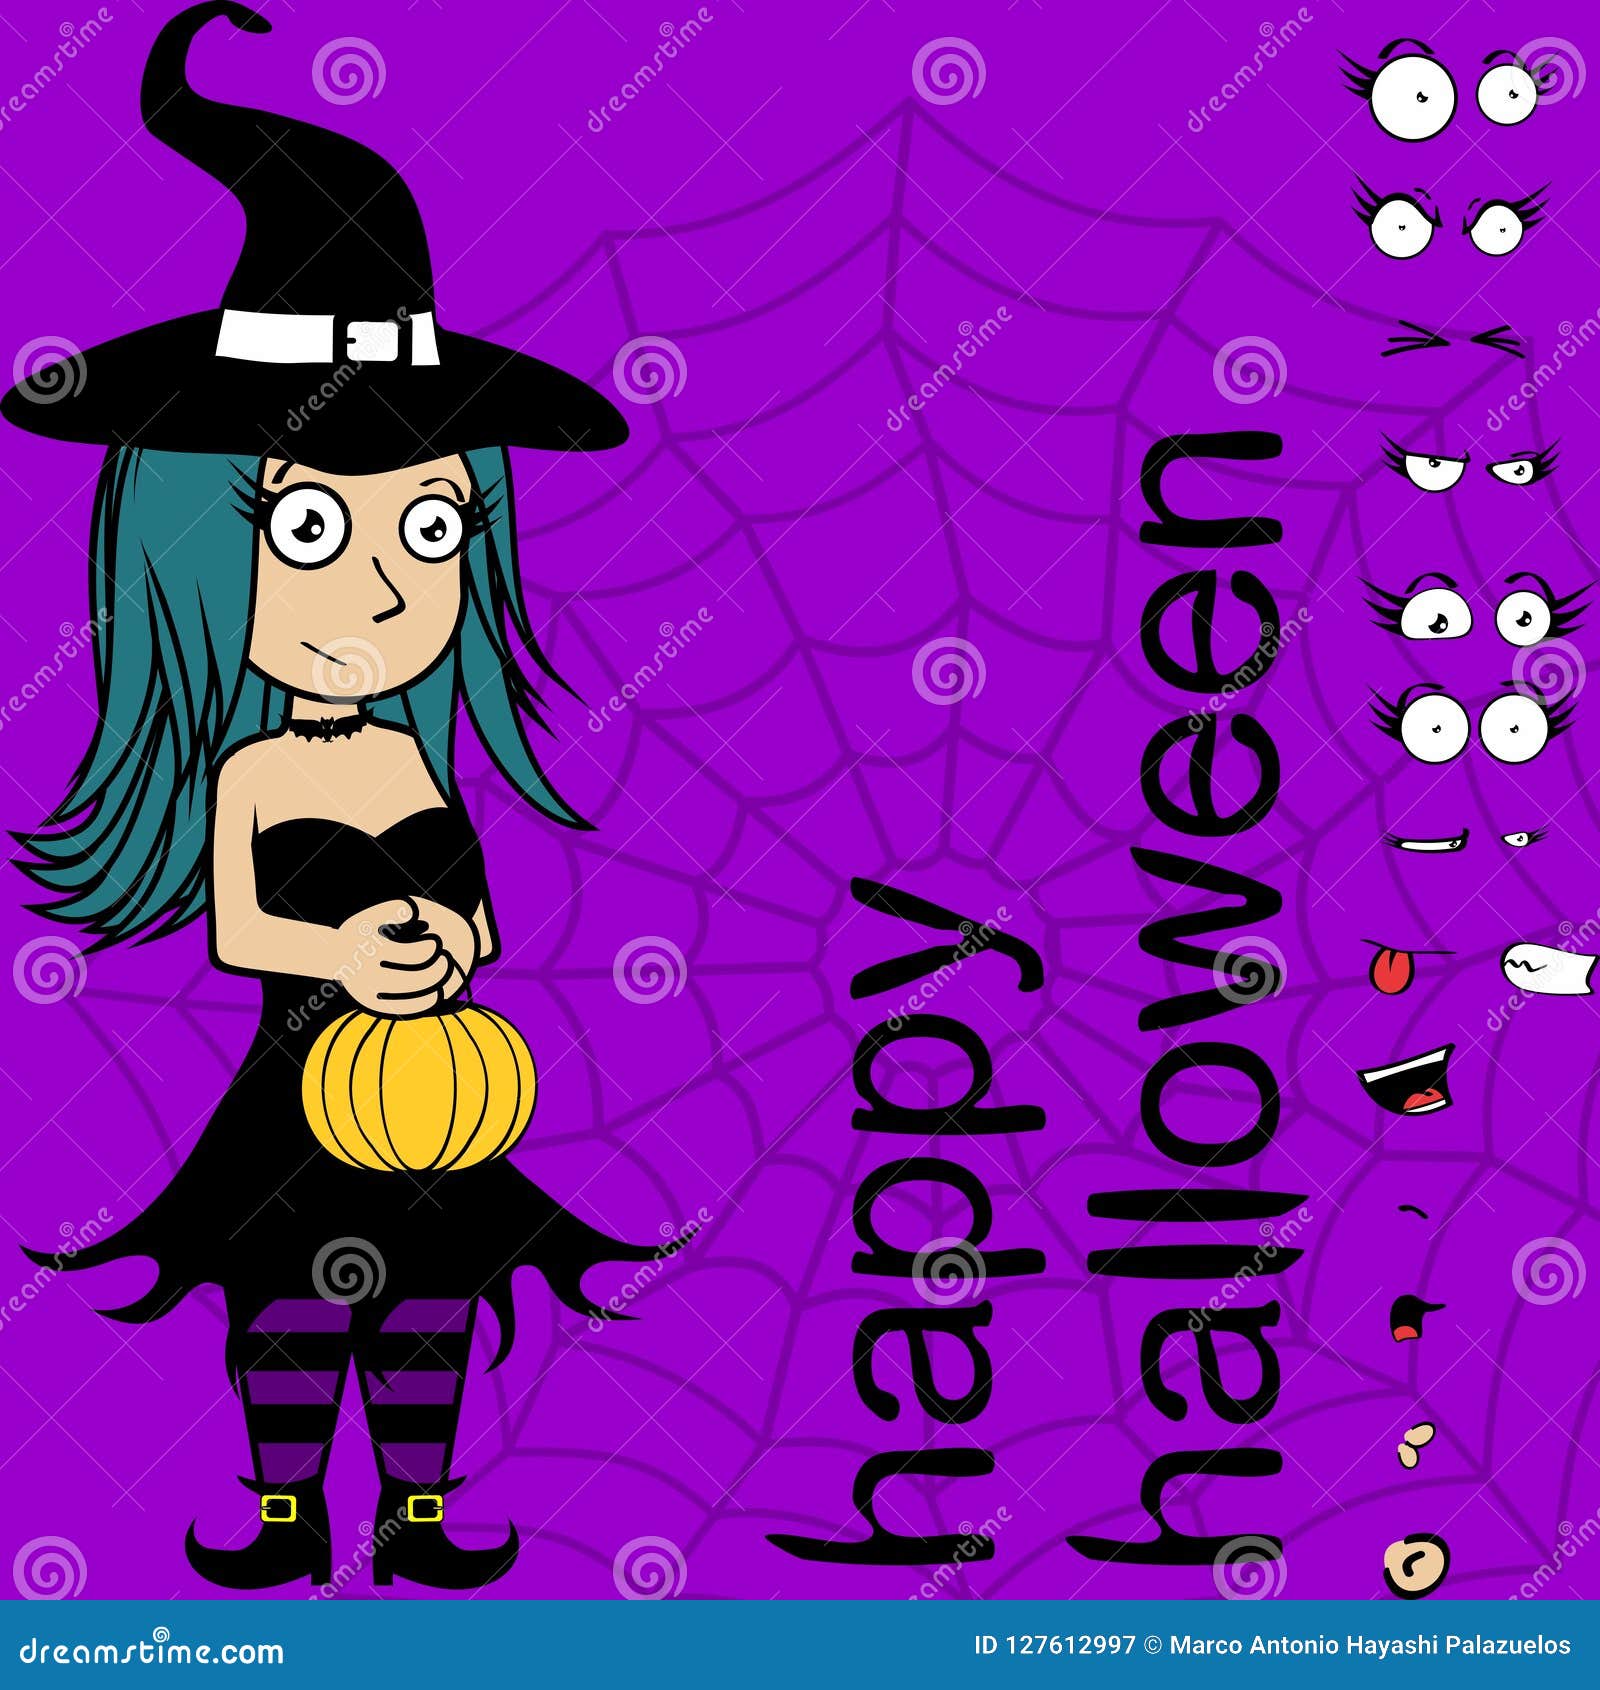 Smile Witch Girl Cartoon Expressions Halloween Collection Stock Vector ...